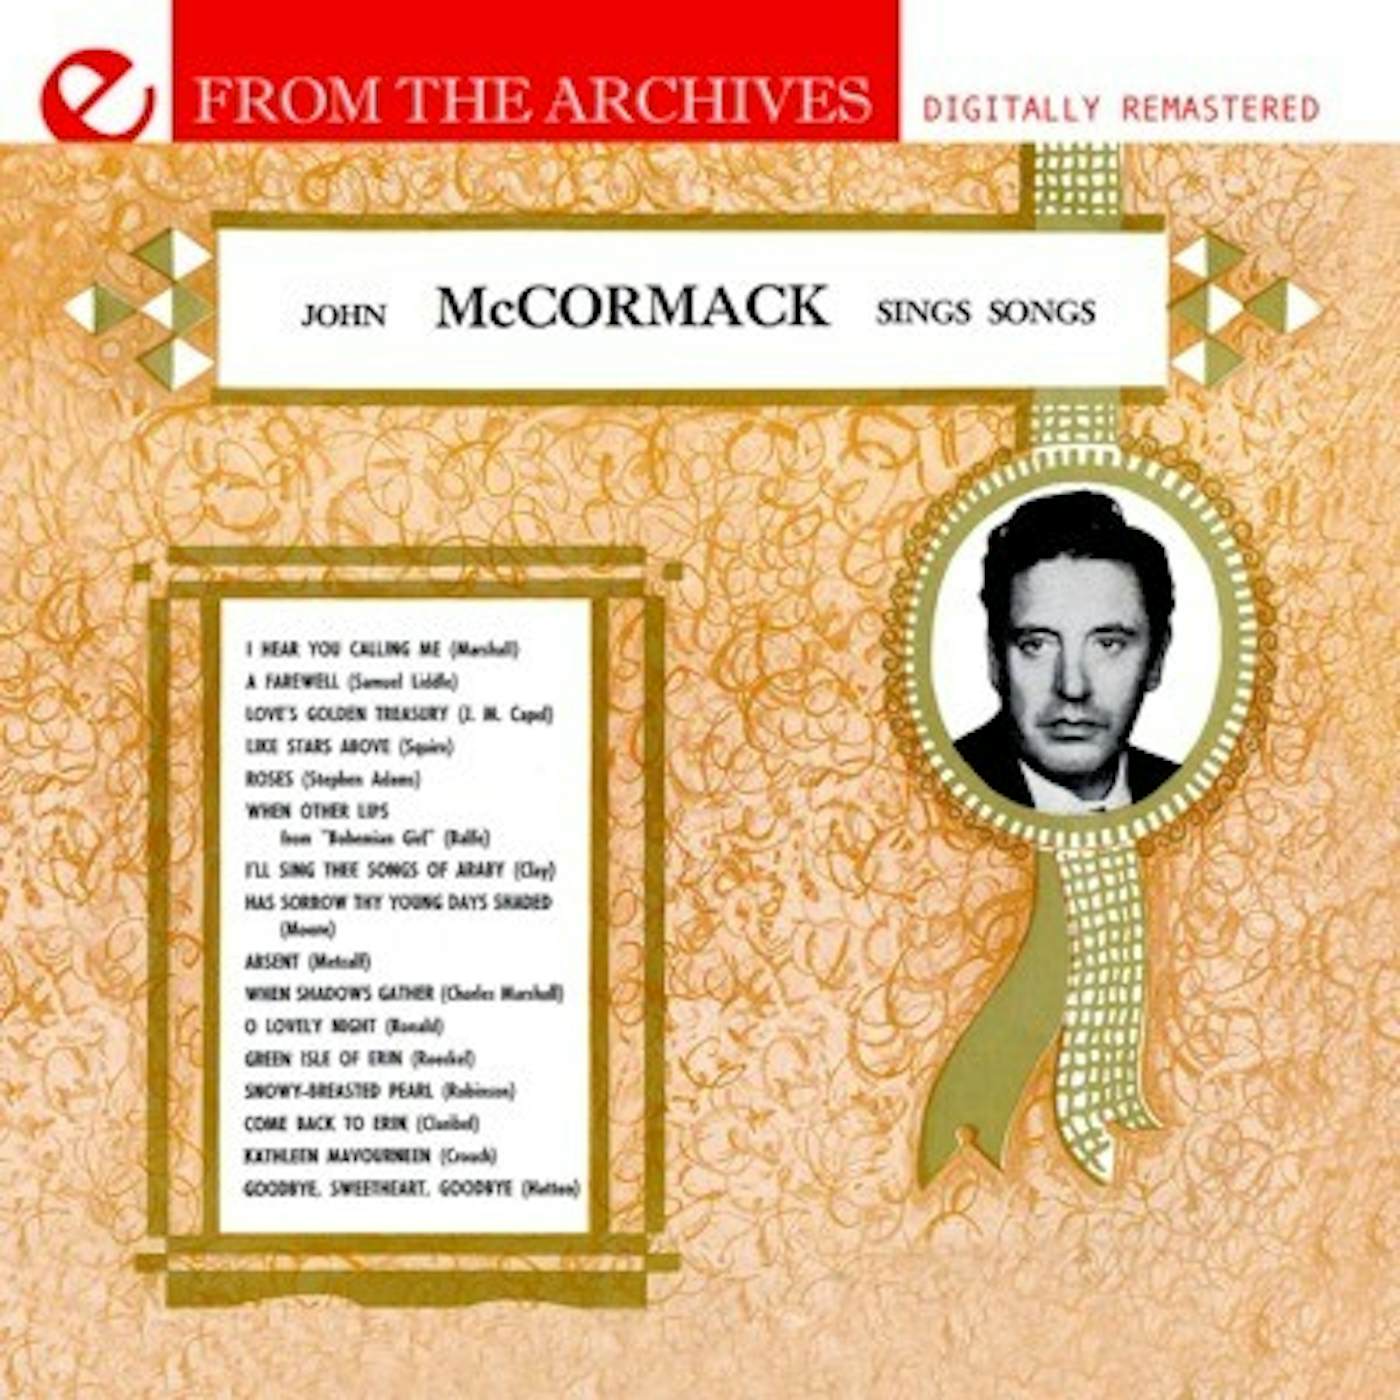 John McCormack FROM THE ARCHIVES CD